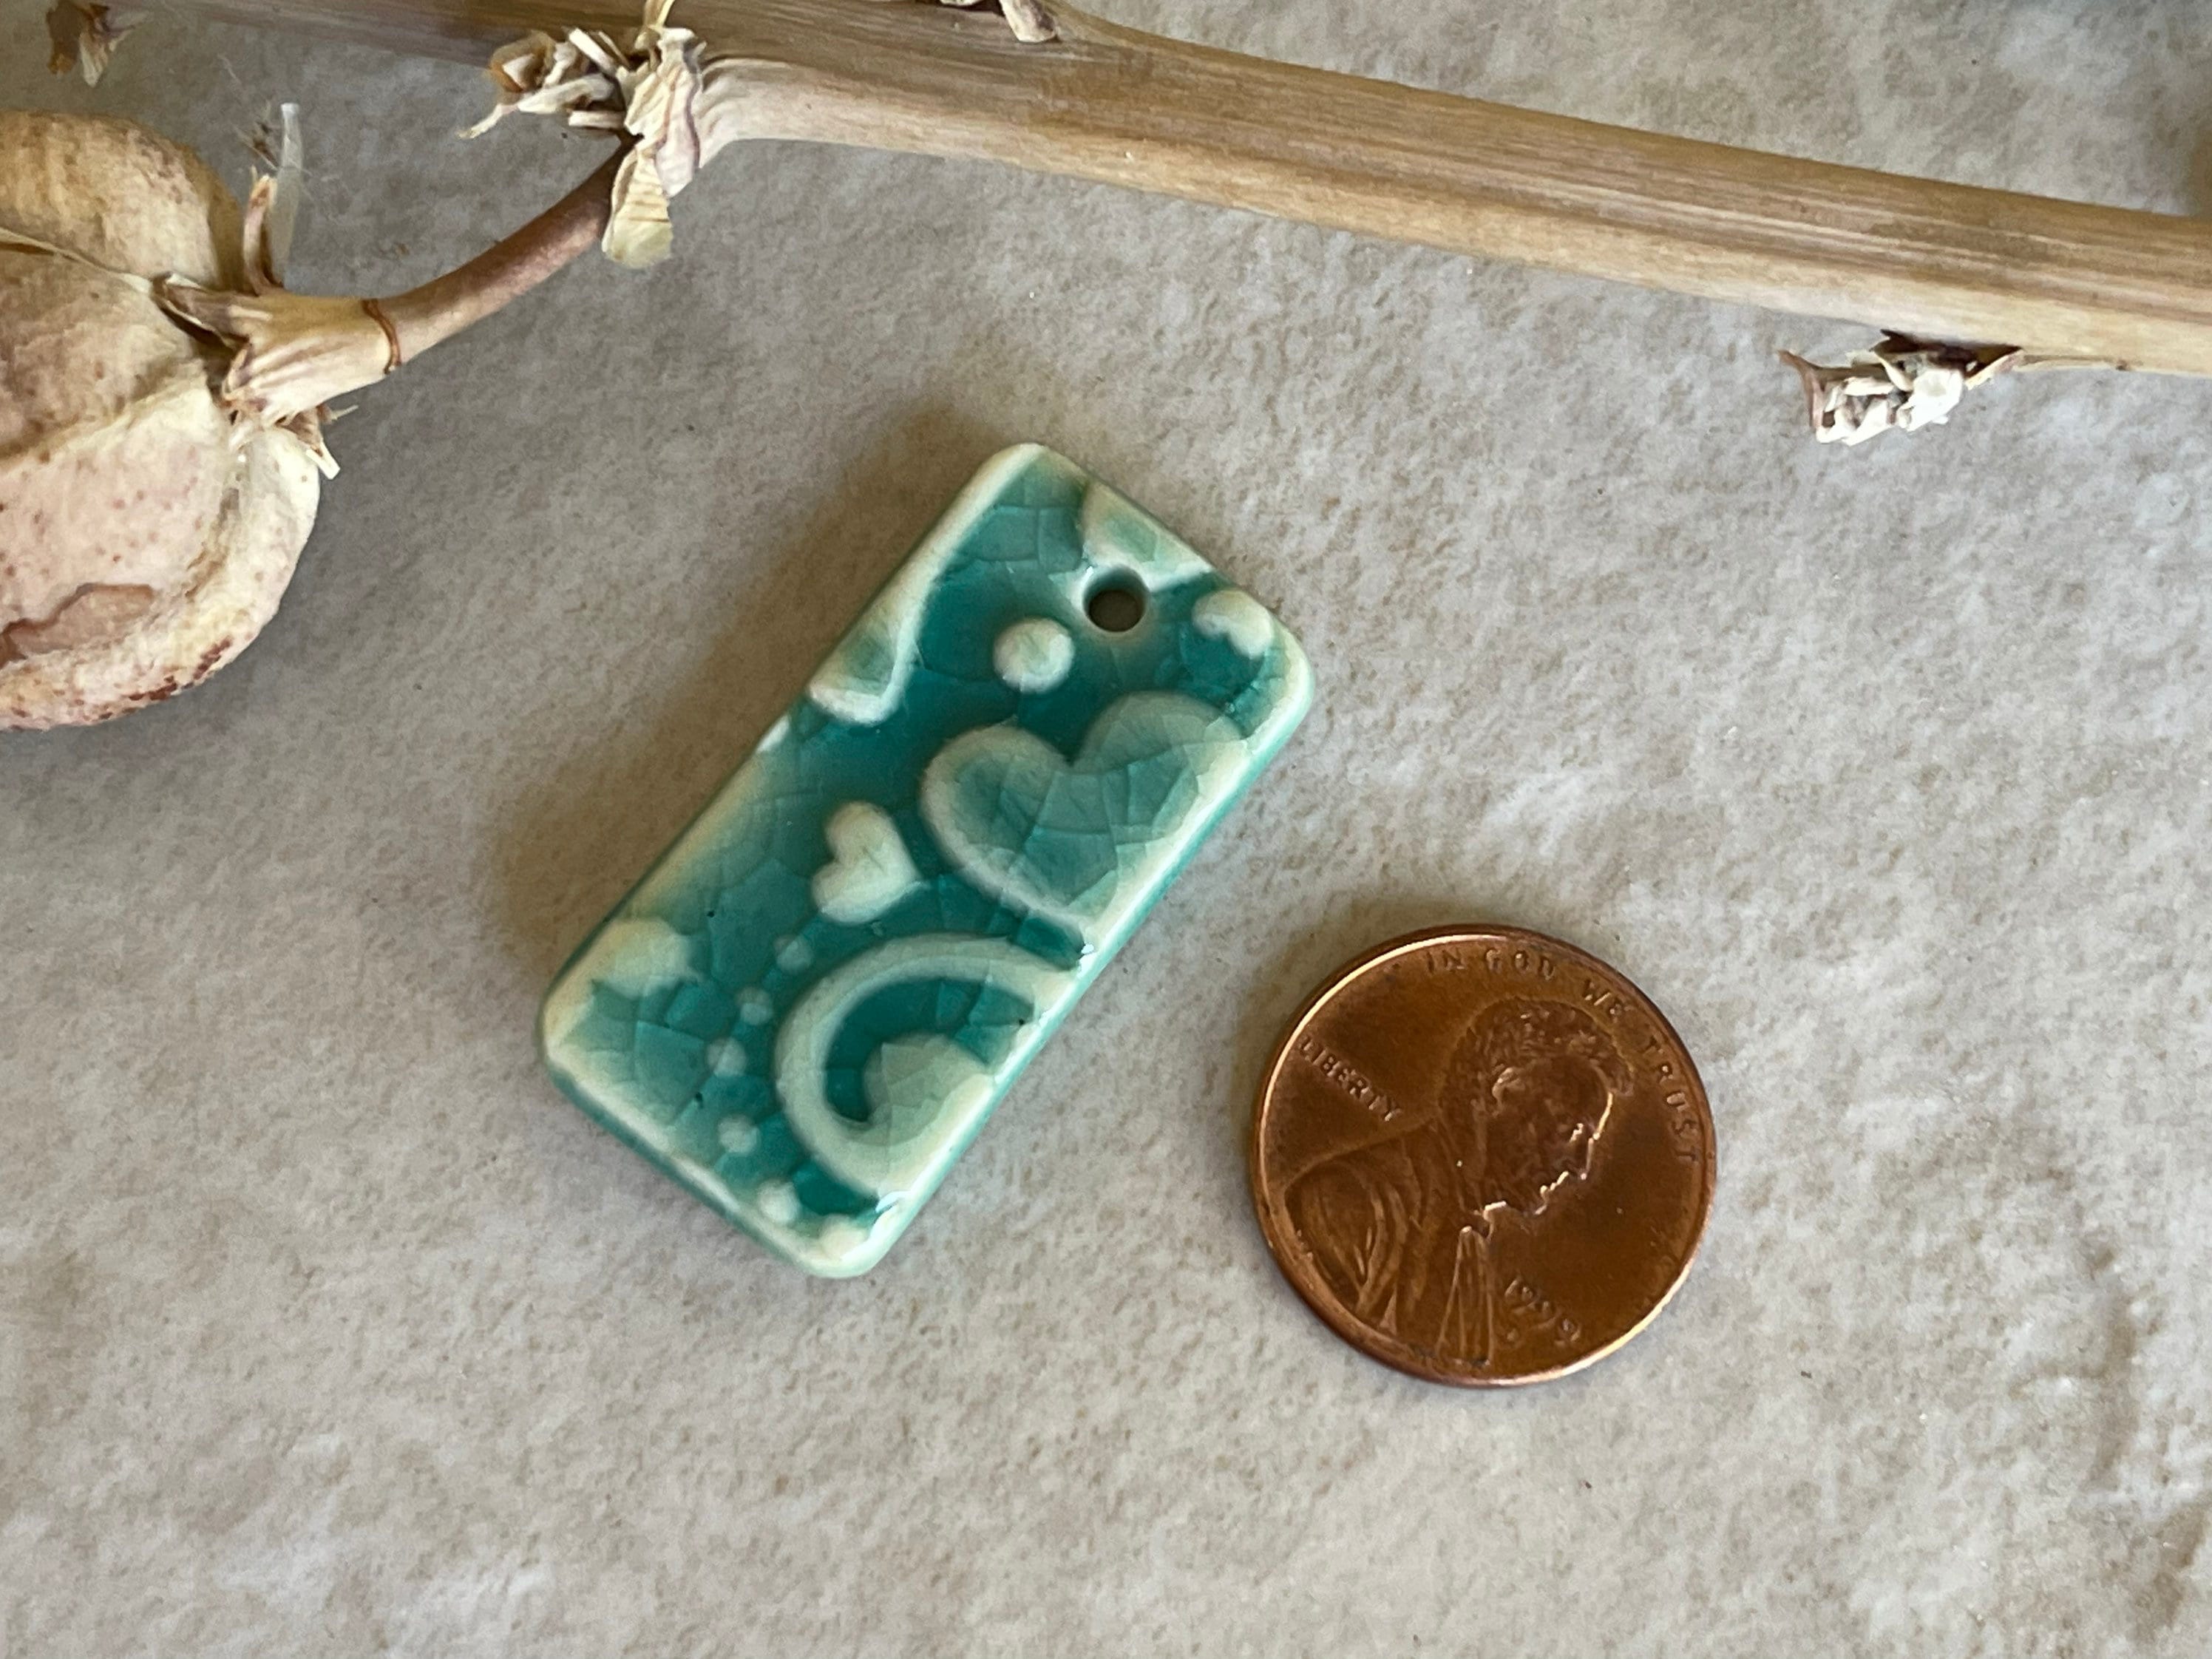 Turquoise Heart Pendant Bead, Porcelain Beads, Ceramic Charms, Jewelry Making Components, DIY Necklace Beads, Pendant